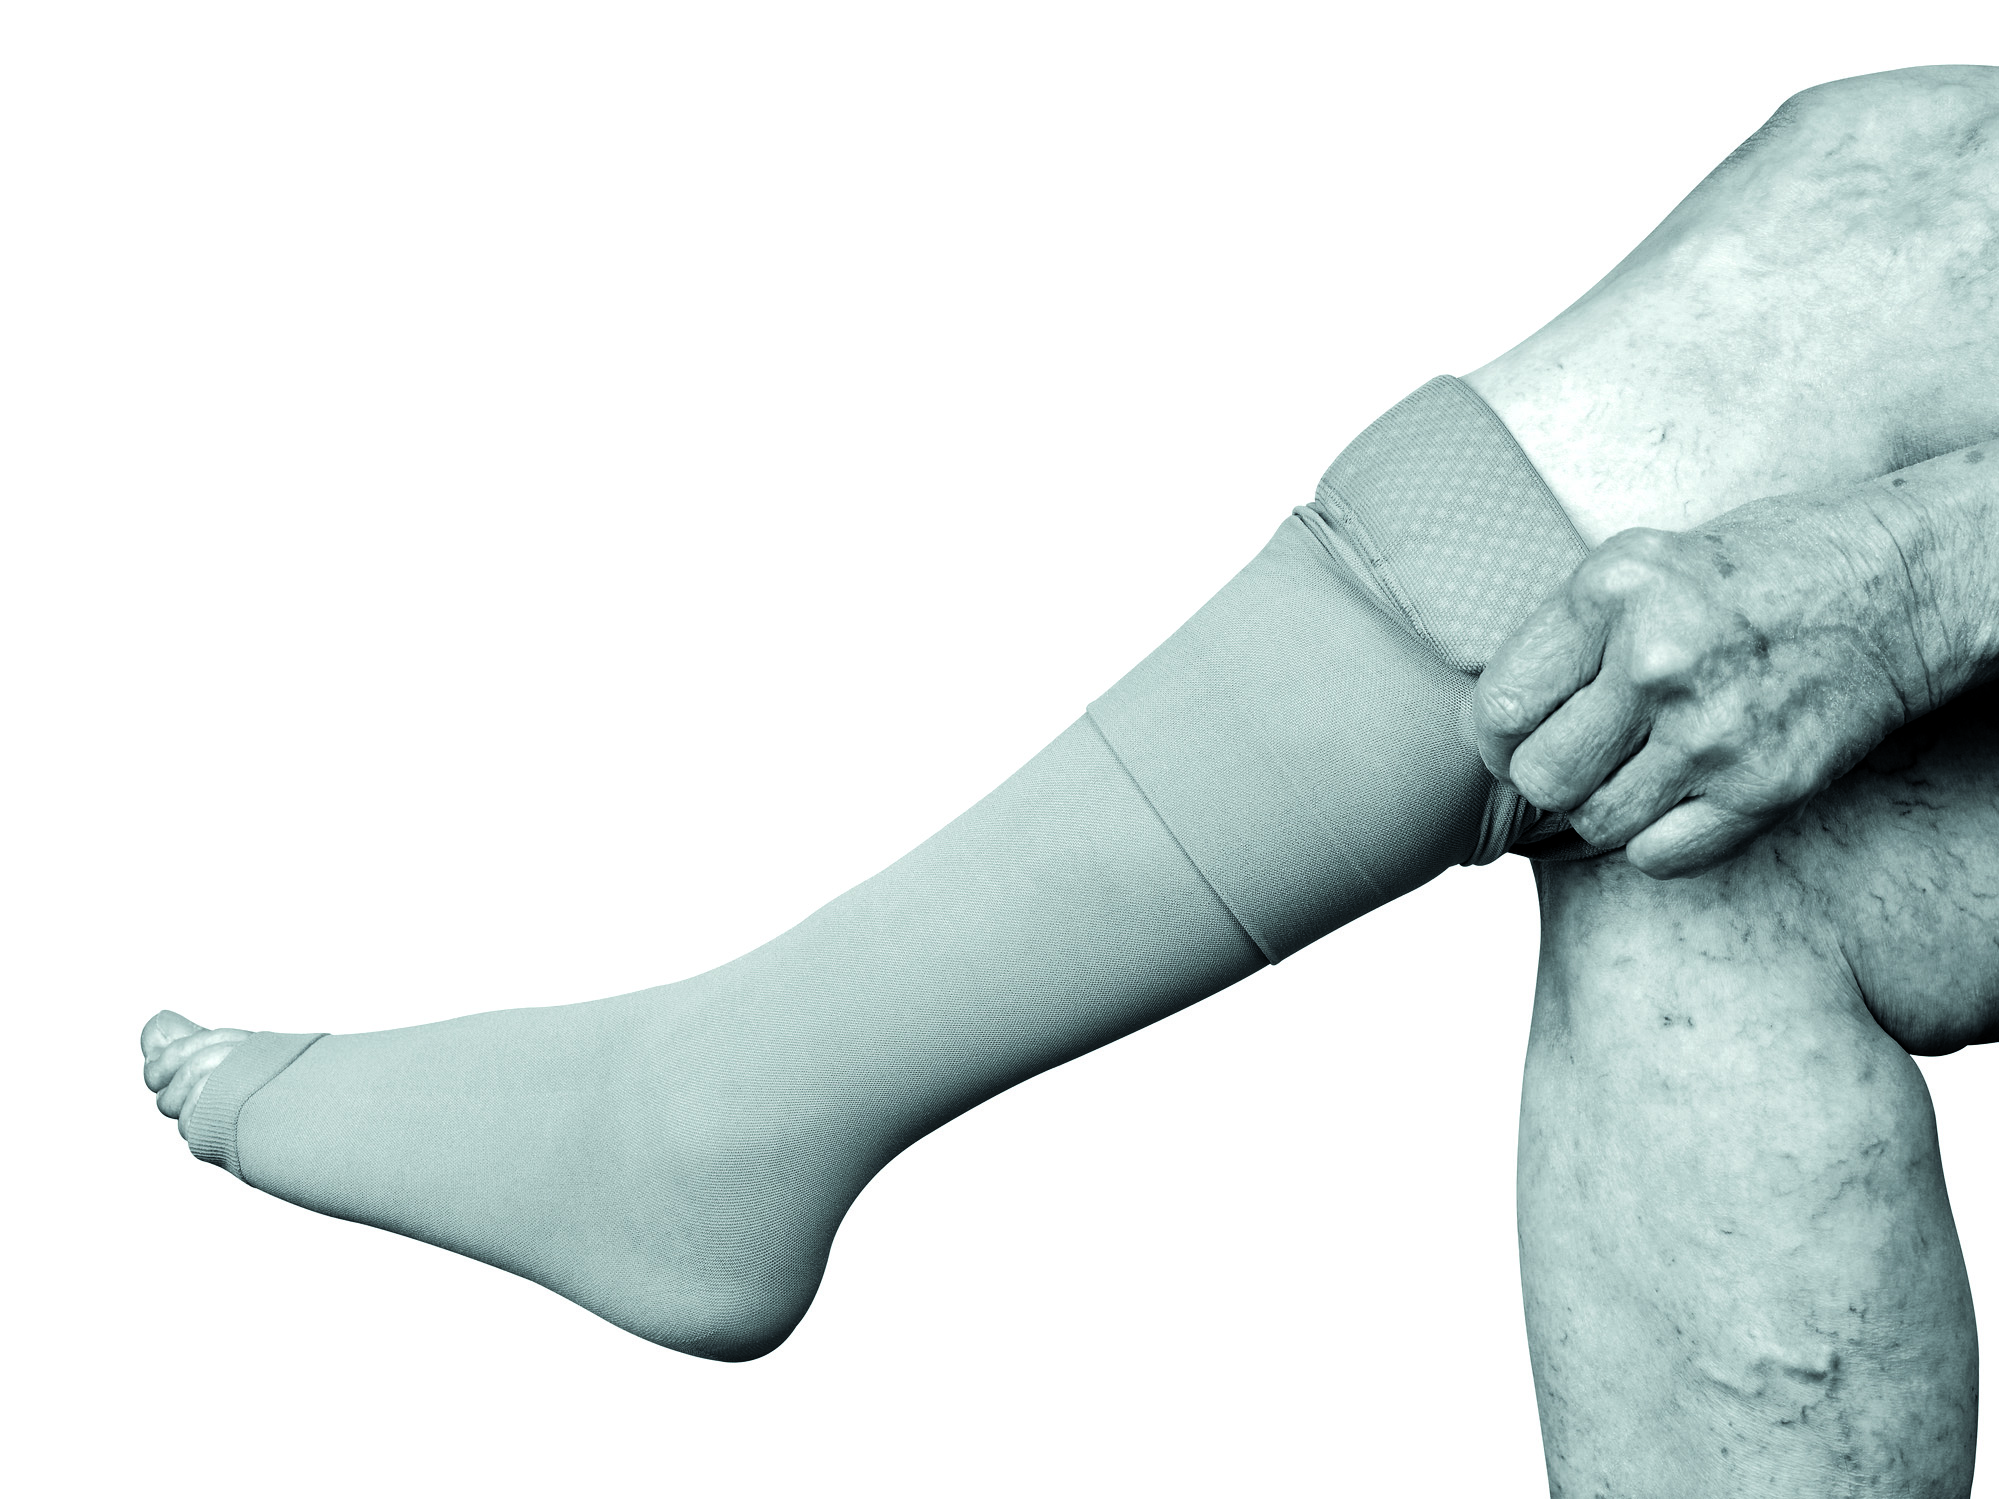 Compression Socks For Varicose Veins by Pikovit / Science Photo Library